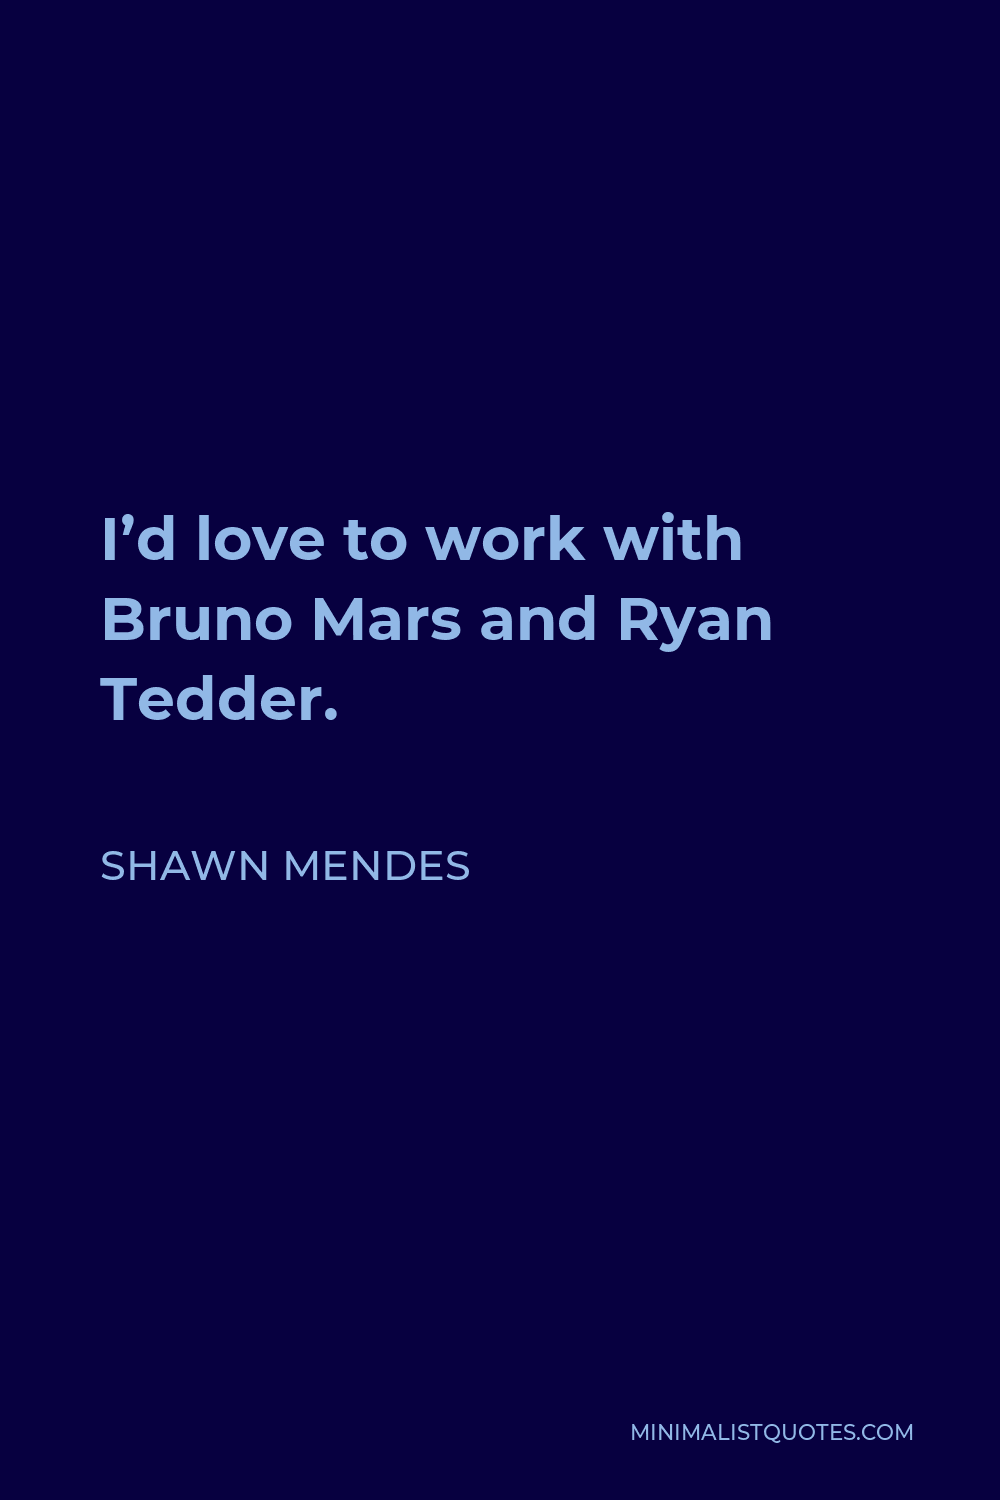 Shawn Mendes Quote - I’d love to work with Bruno Mars and Ryan Tedder.